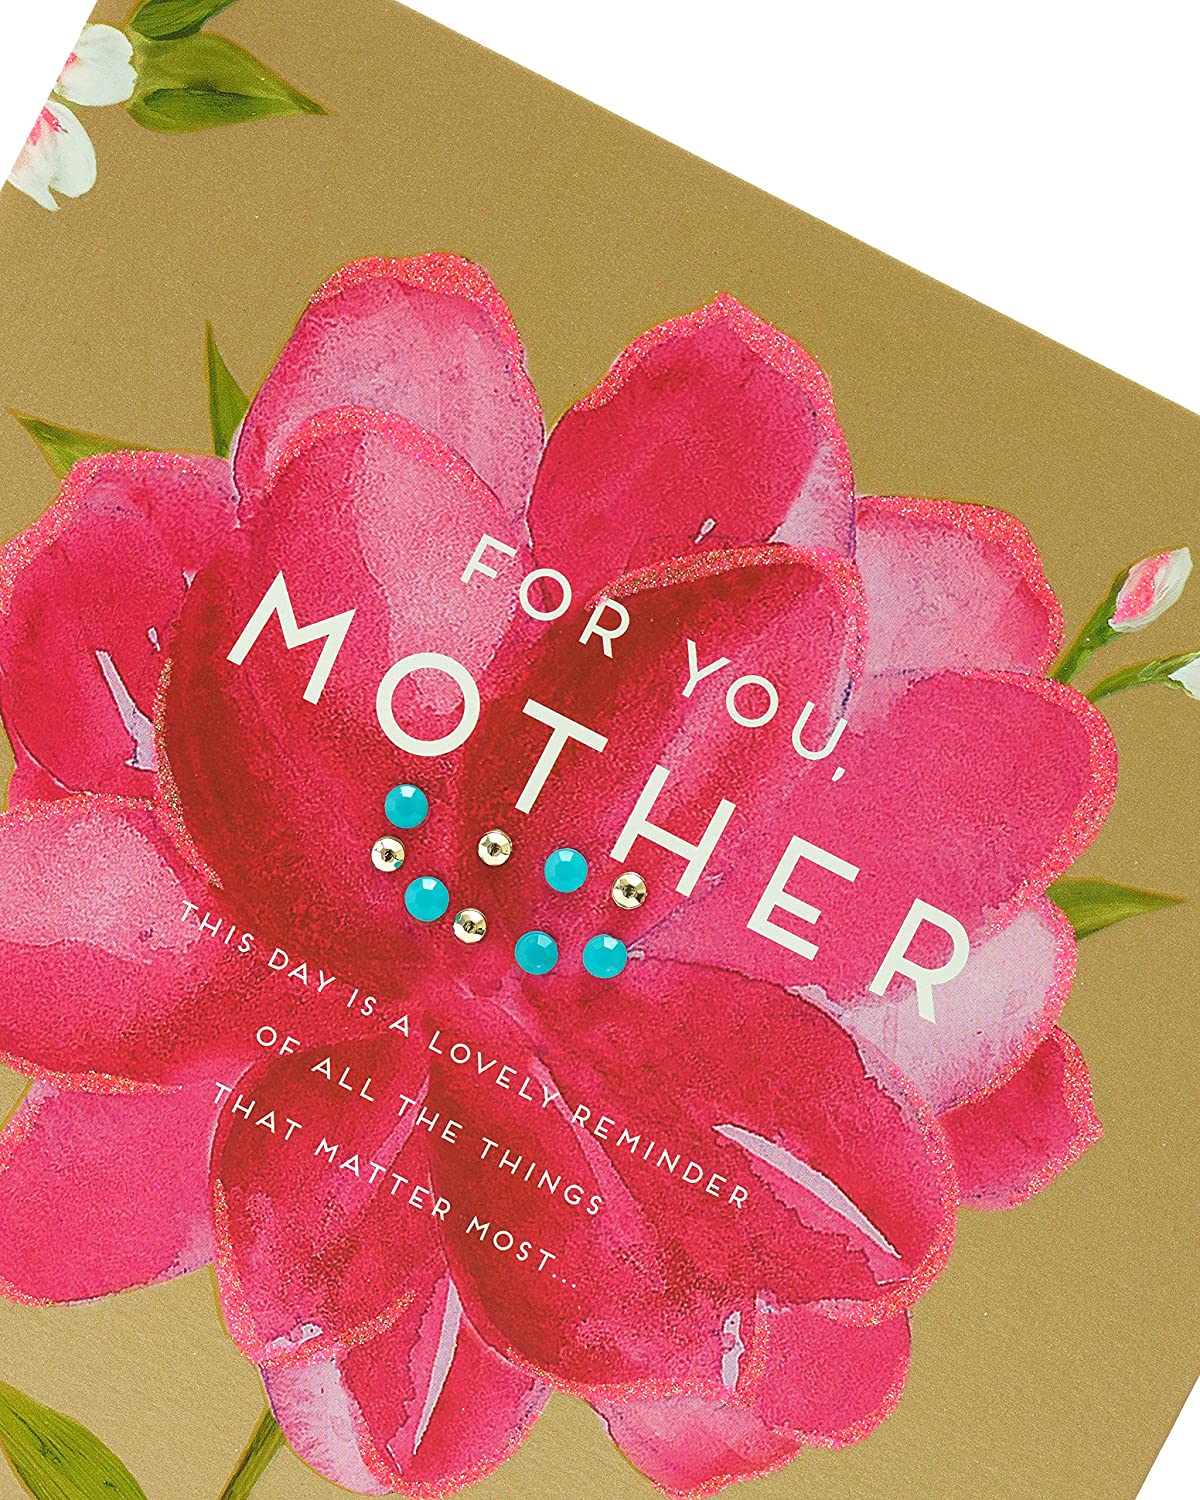 For A Wonderful Lovely Pink Flower Design Mother's Day Card